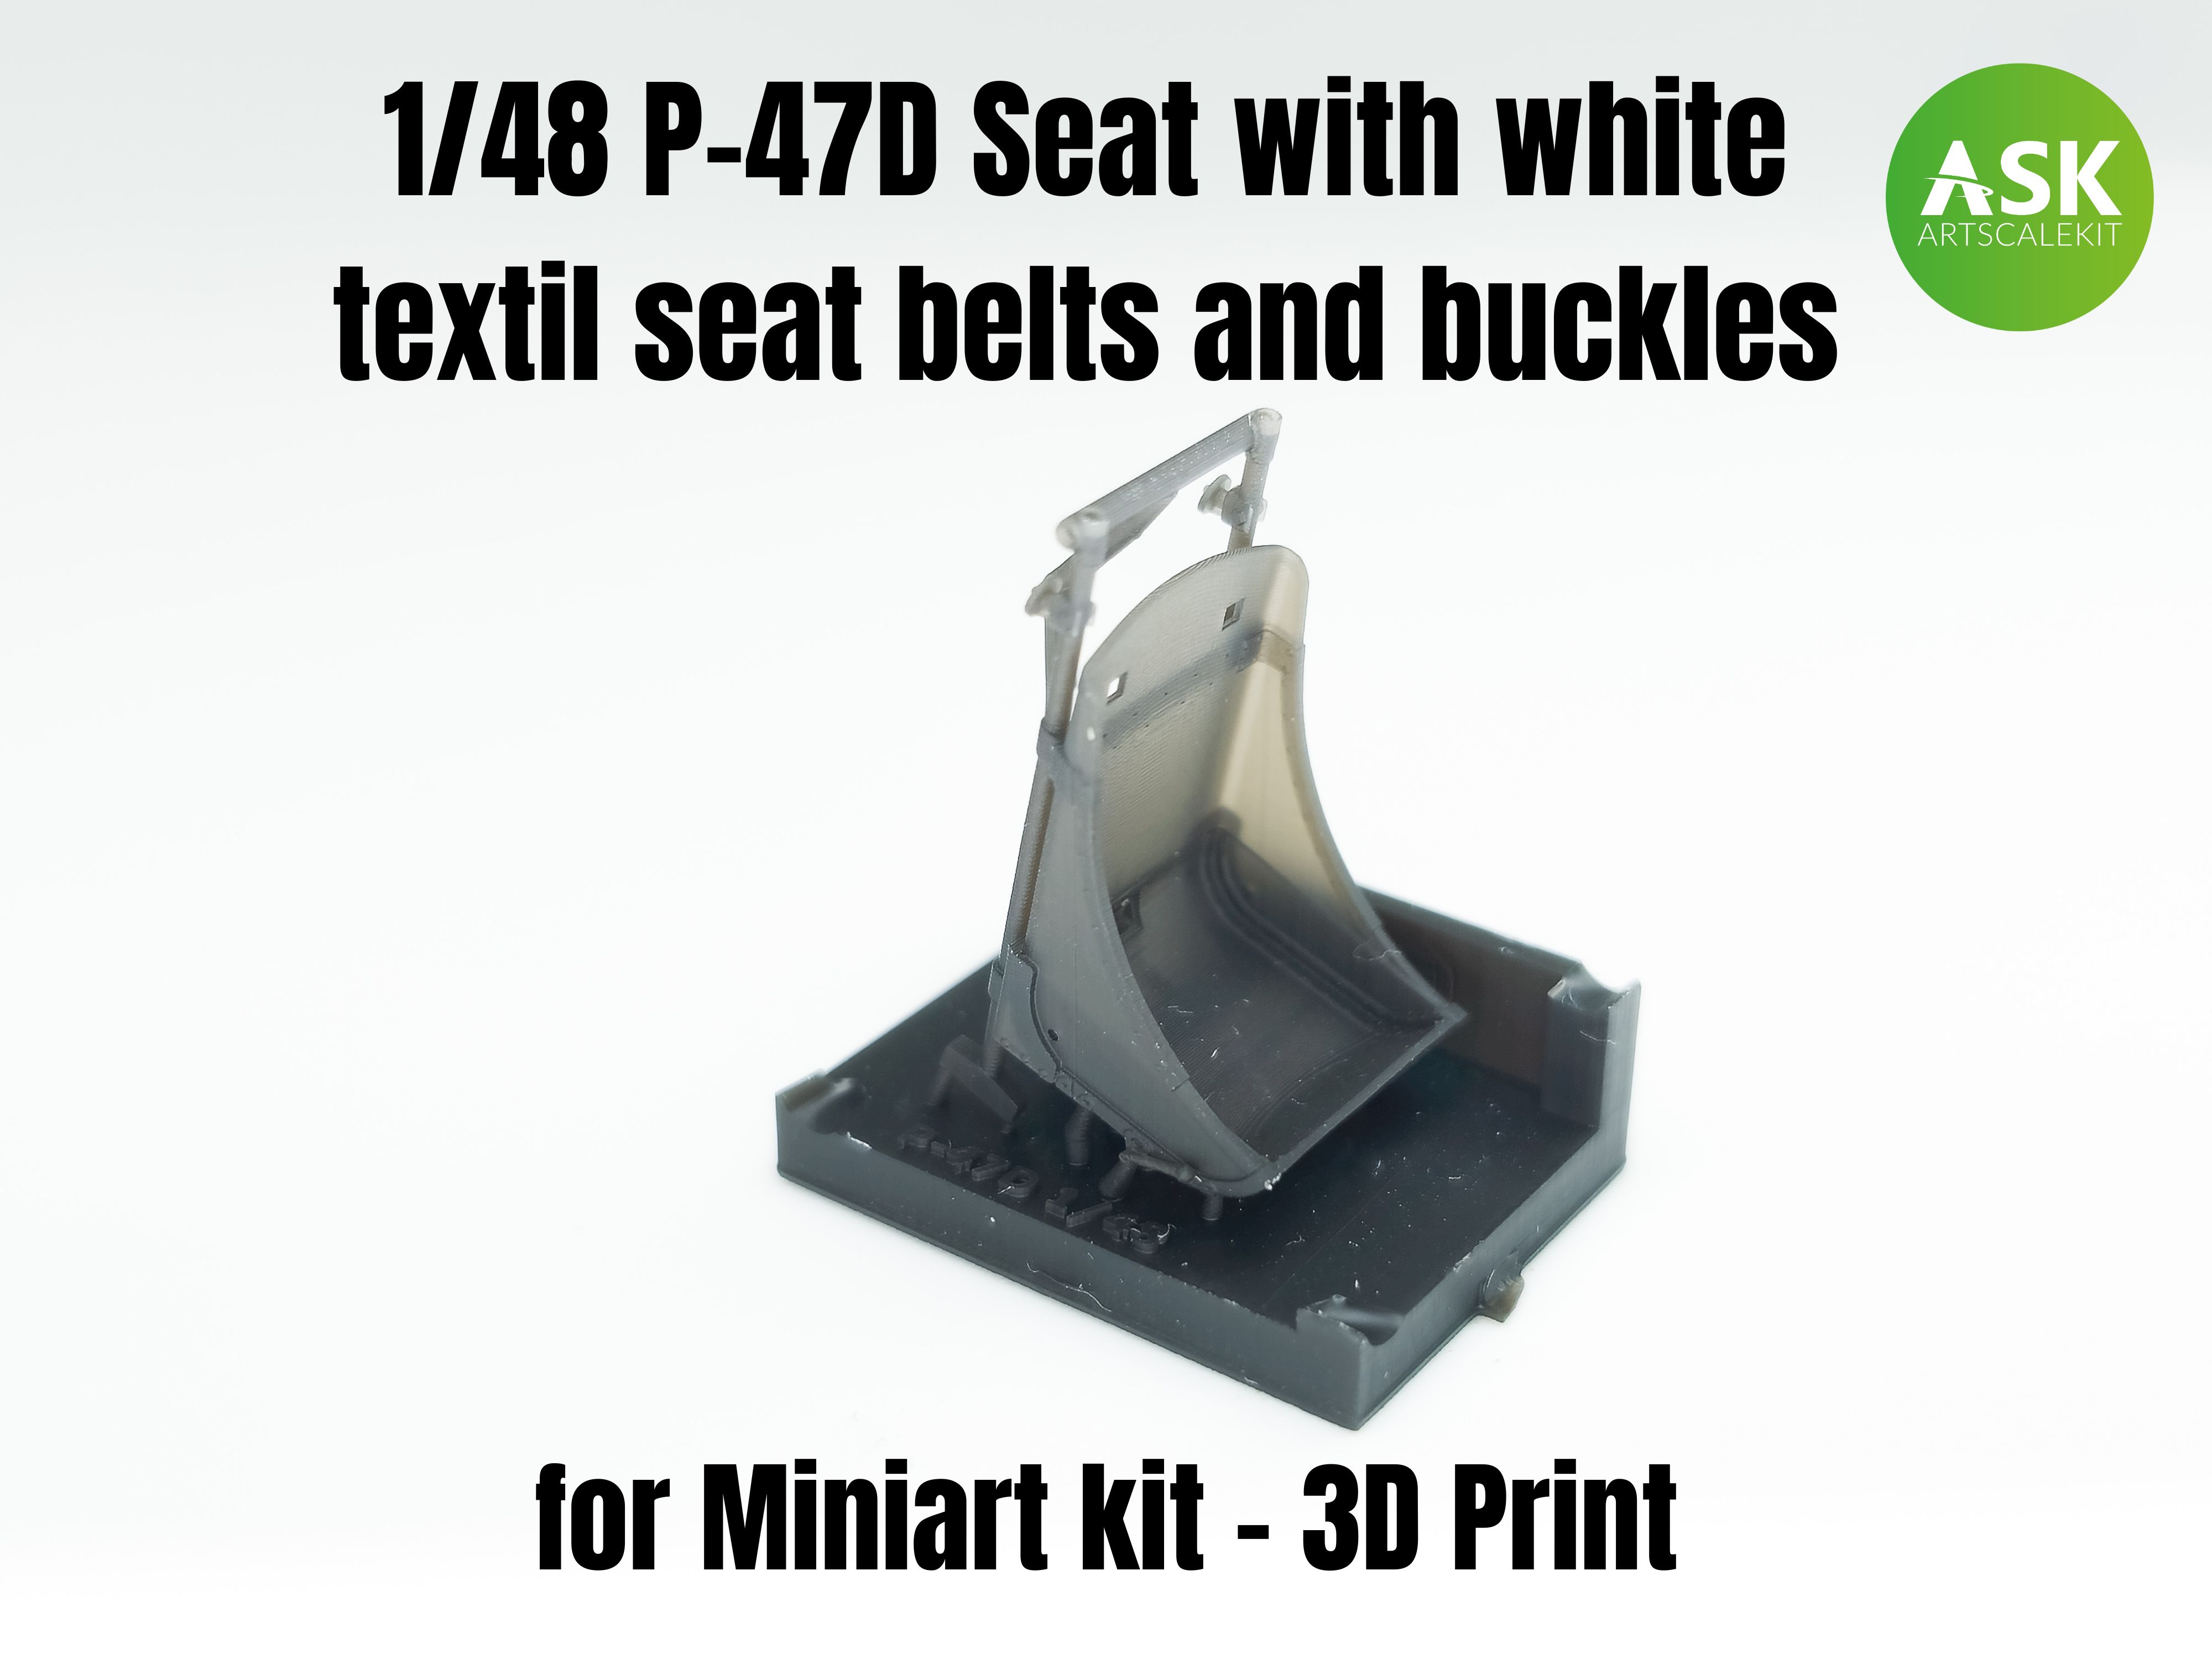 1/48 P-47D Seat with white textil seat belts and buckles